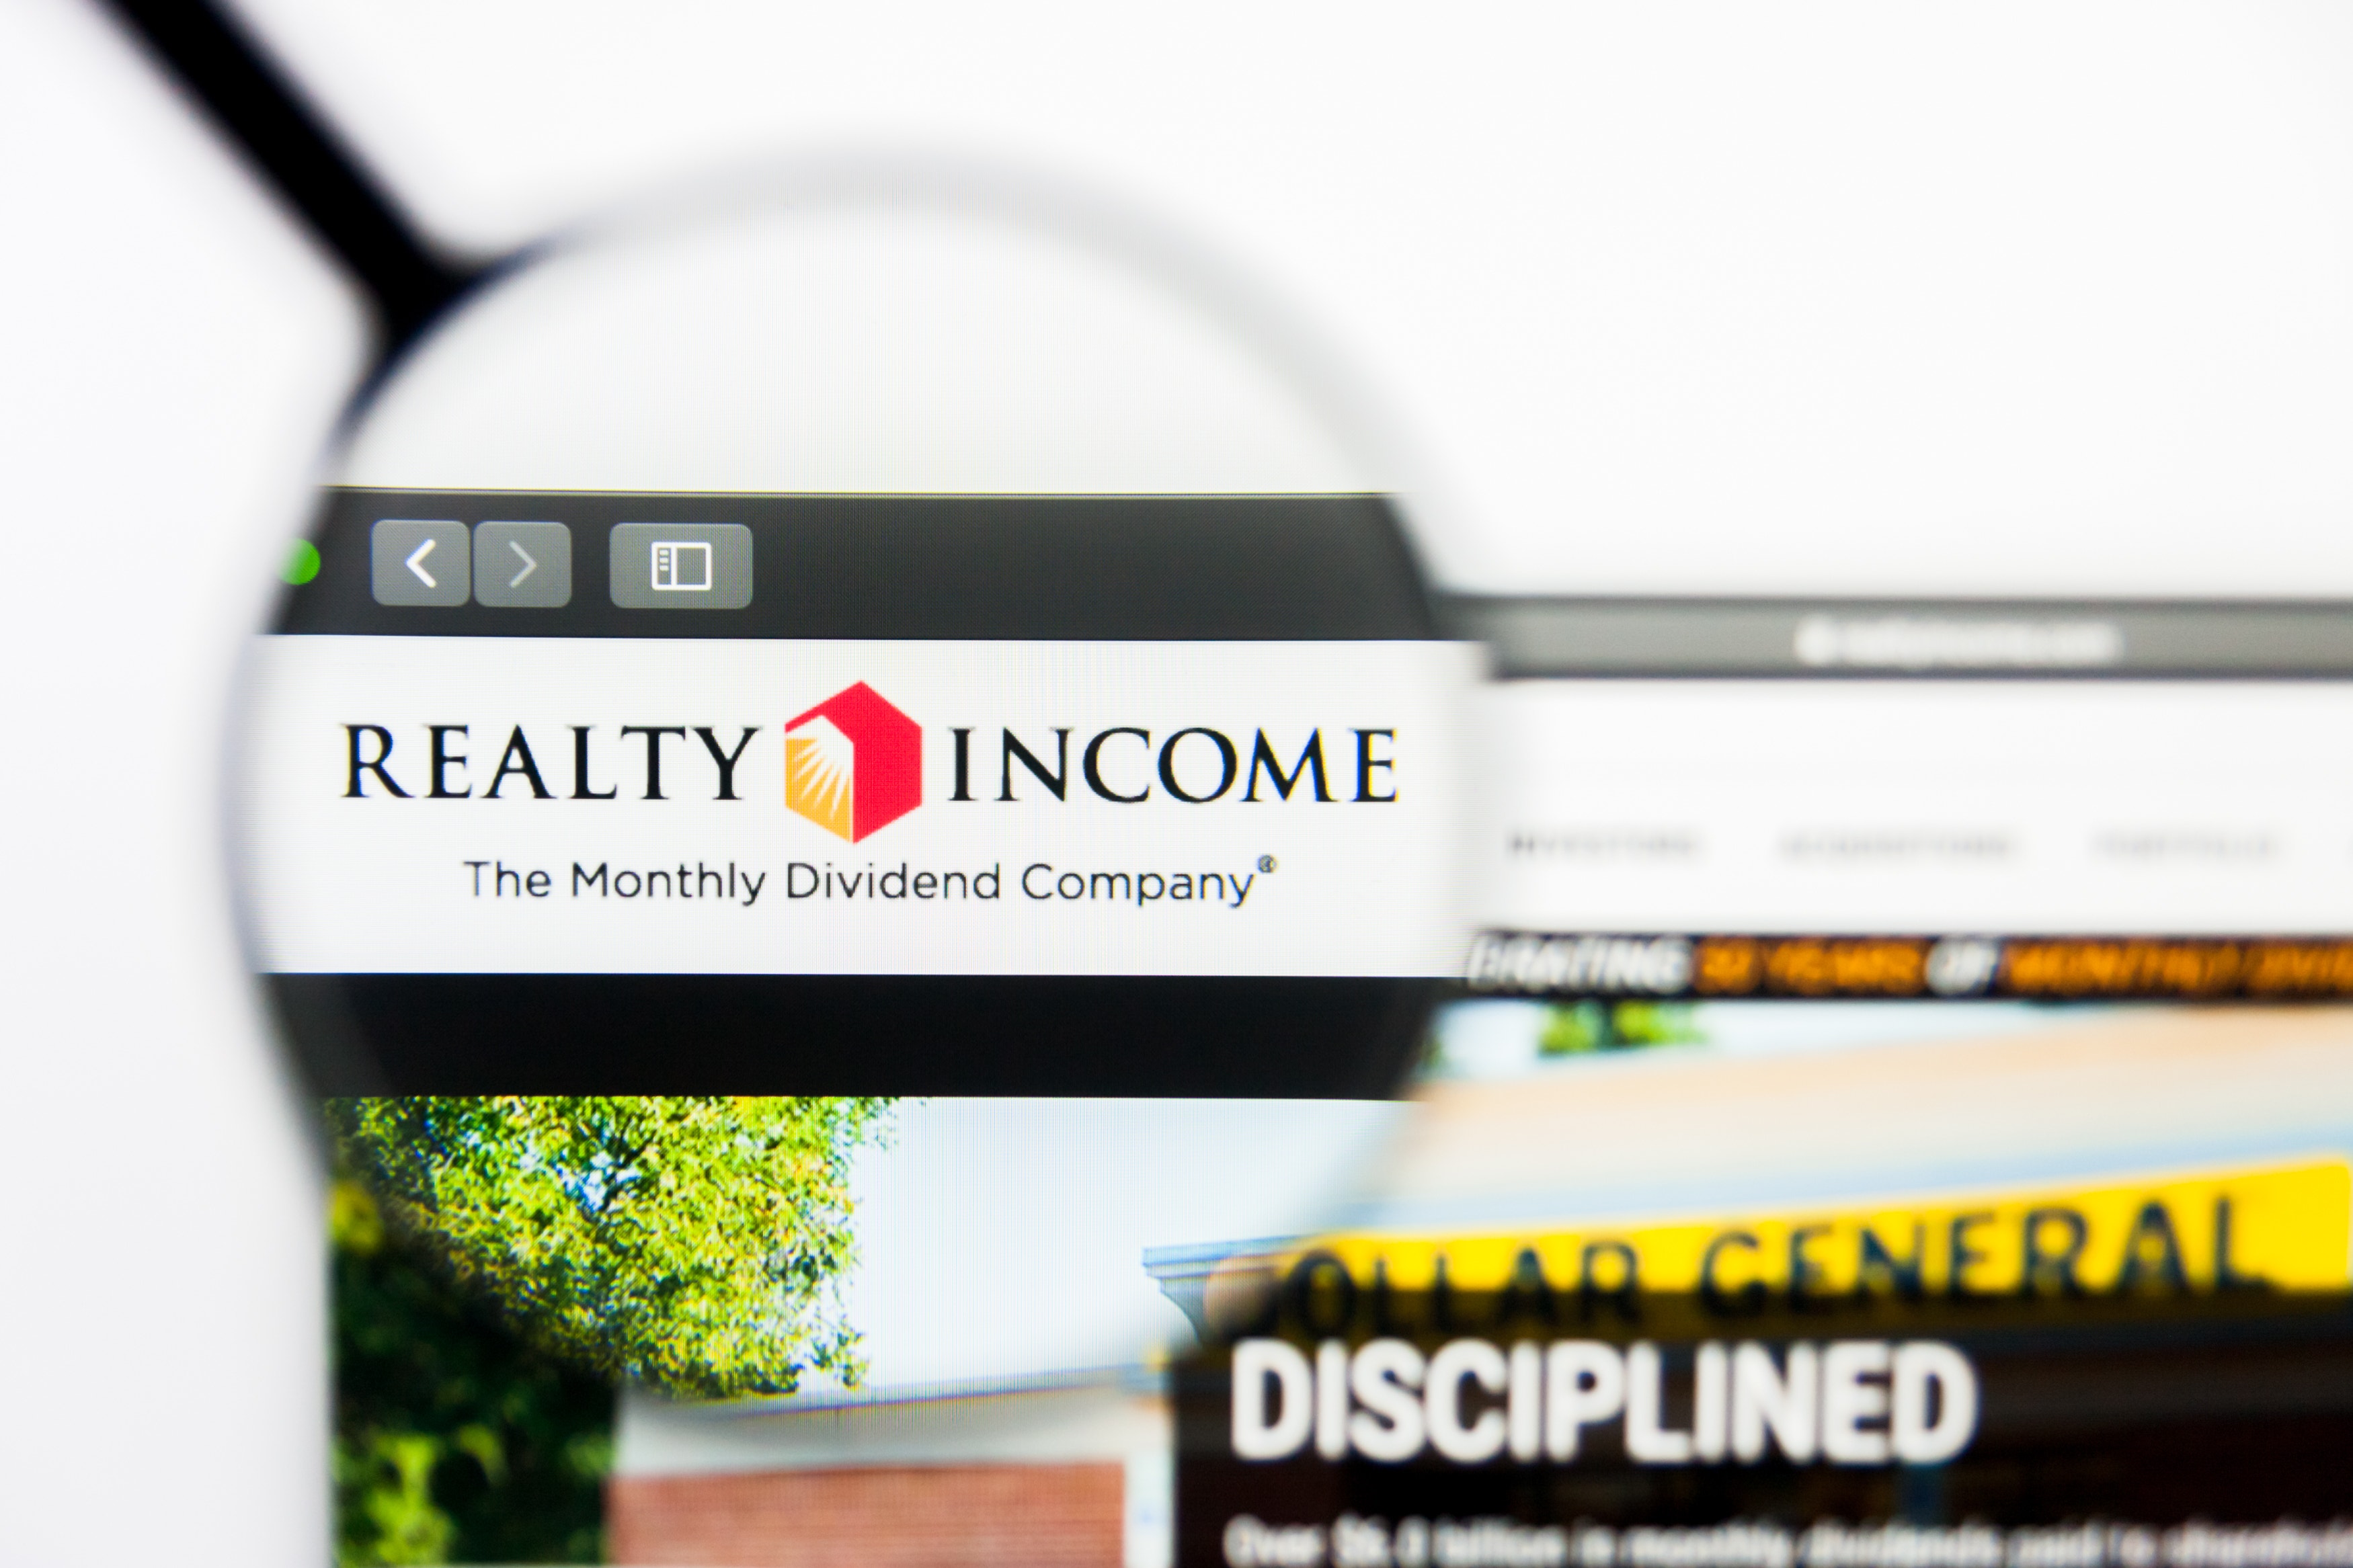 A Look At Realty Income's Highly Volatile Price Action